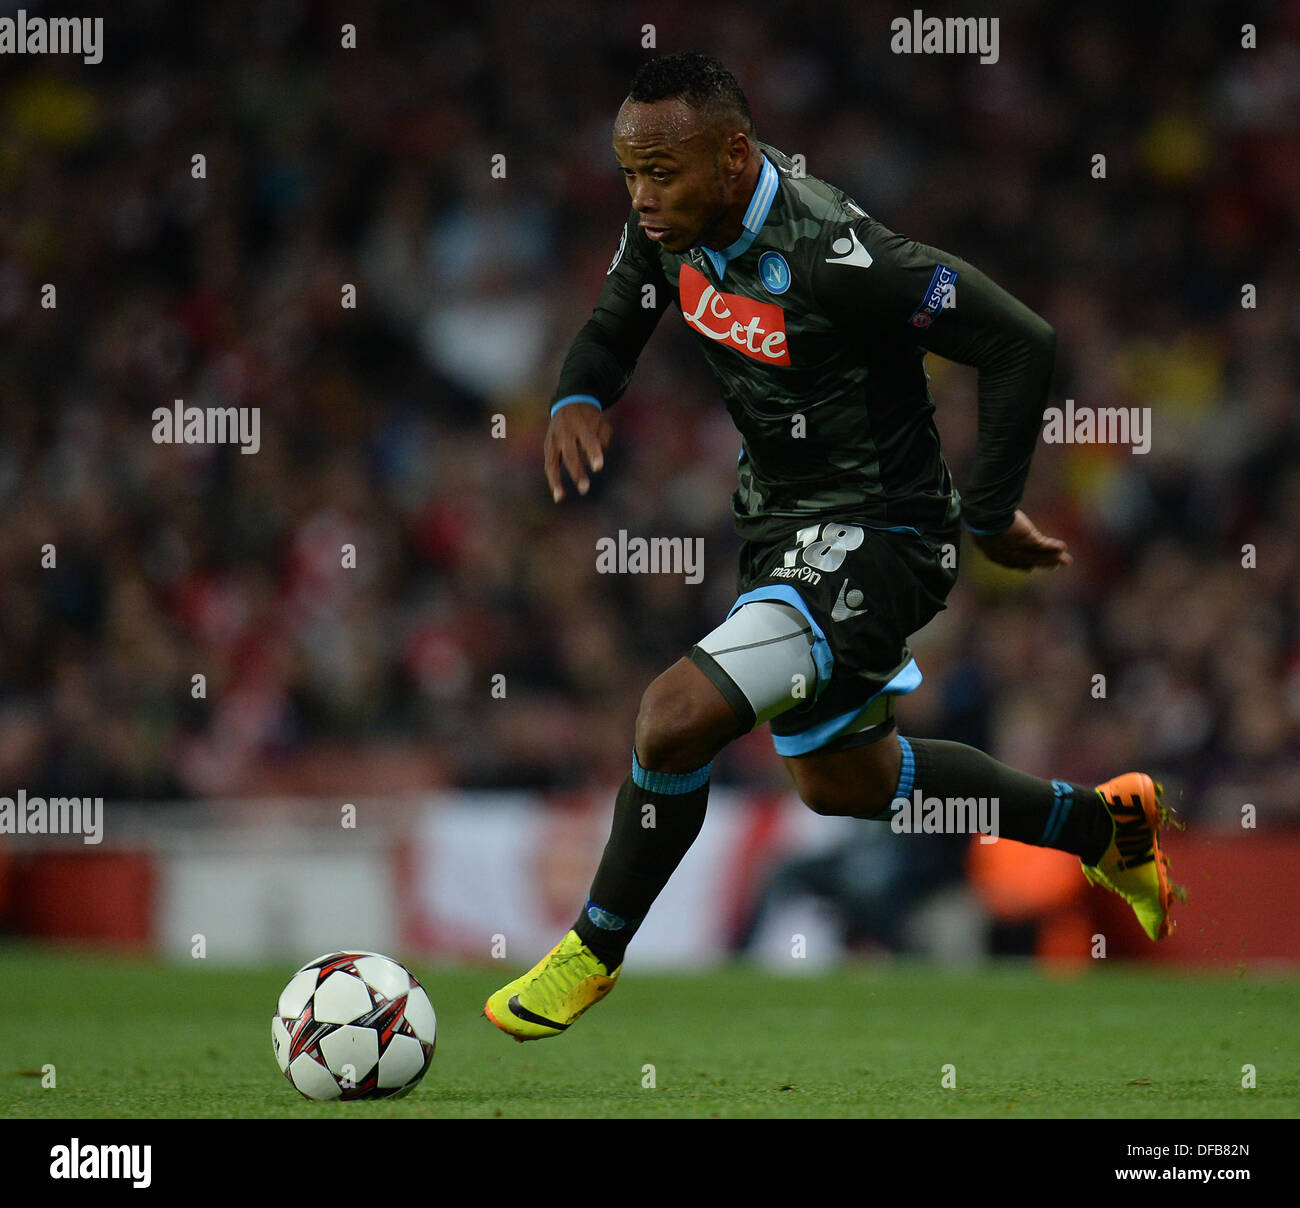 London, UK. 01st Oct, 2013. Napoli's defender Camilo Zuniga from Columbia runs with the ball during the UEFA Champions League match between Arsenal from England and Napoli from Italy played at The Emirates Stadium, on October 01, 2013 in London, England. © Mitchell Gunn/ESPA/Alamy Live News Stock Photo